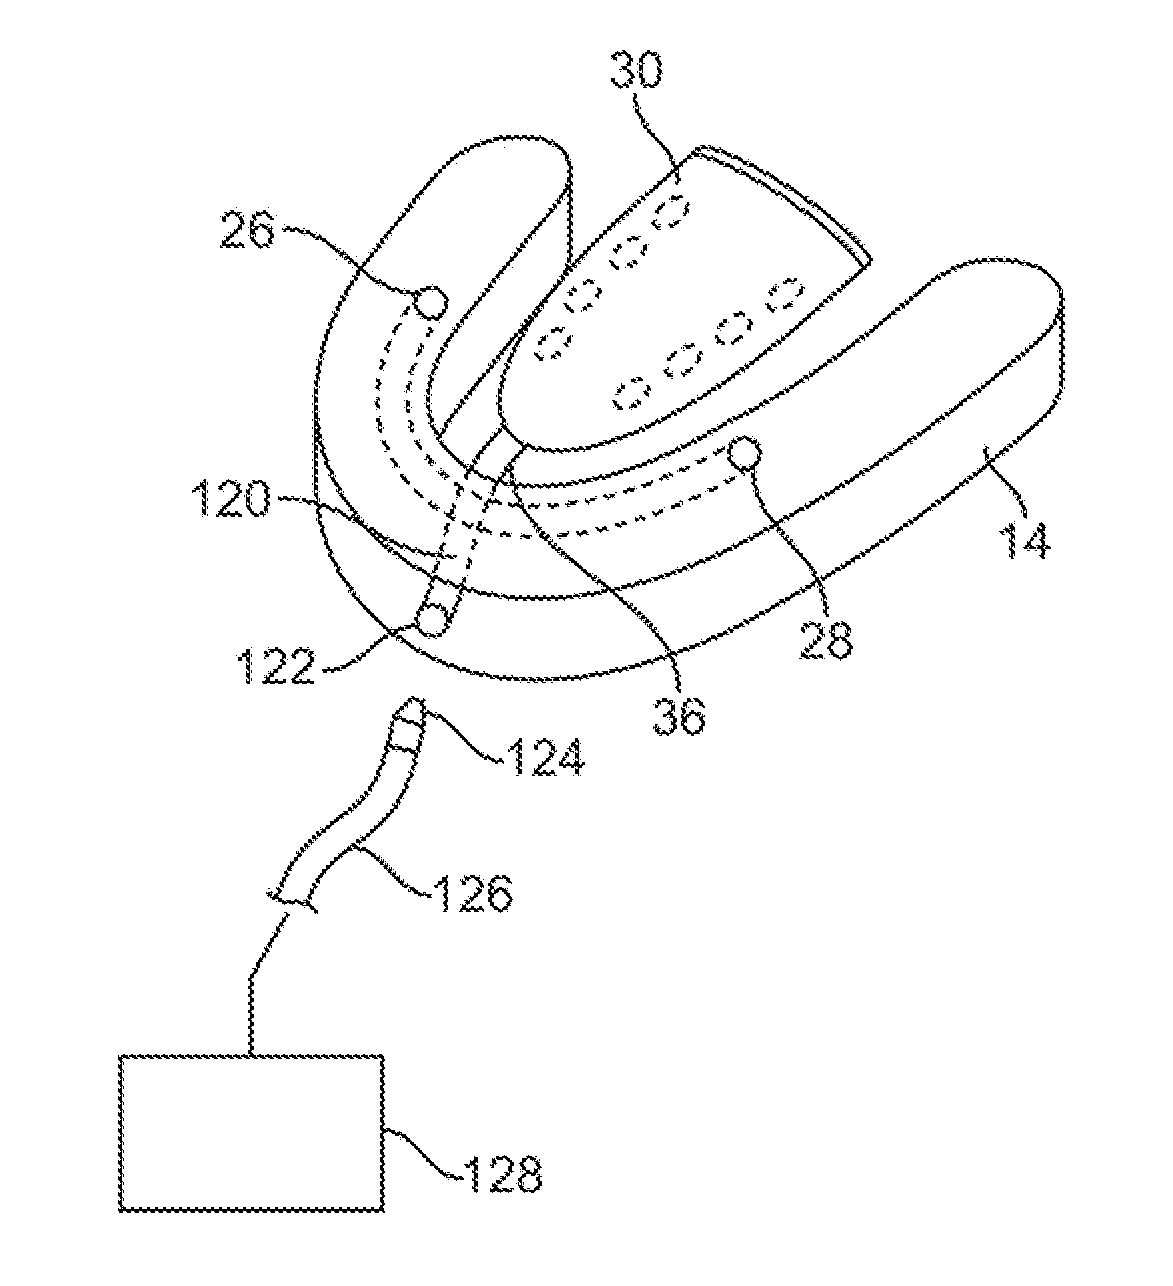 Wearable tissue retention device